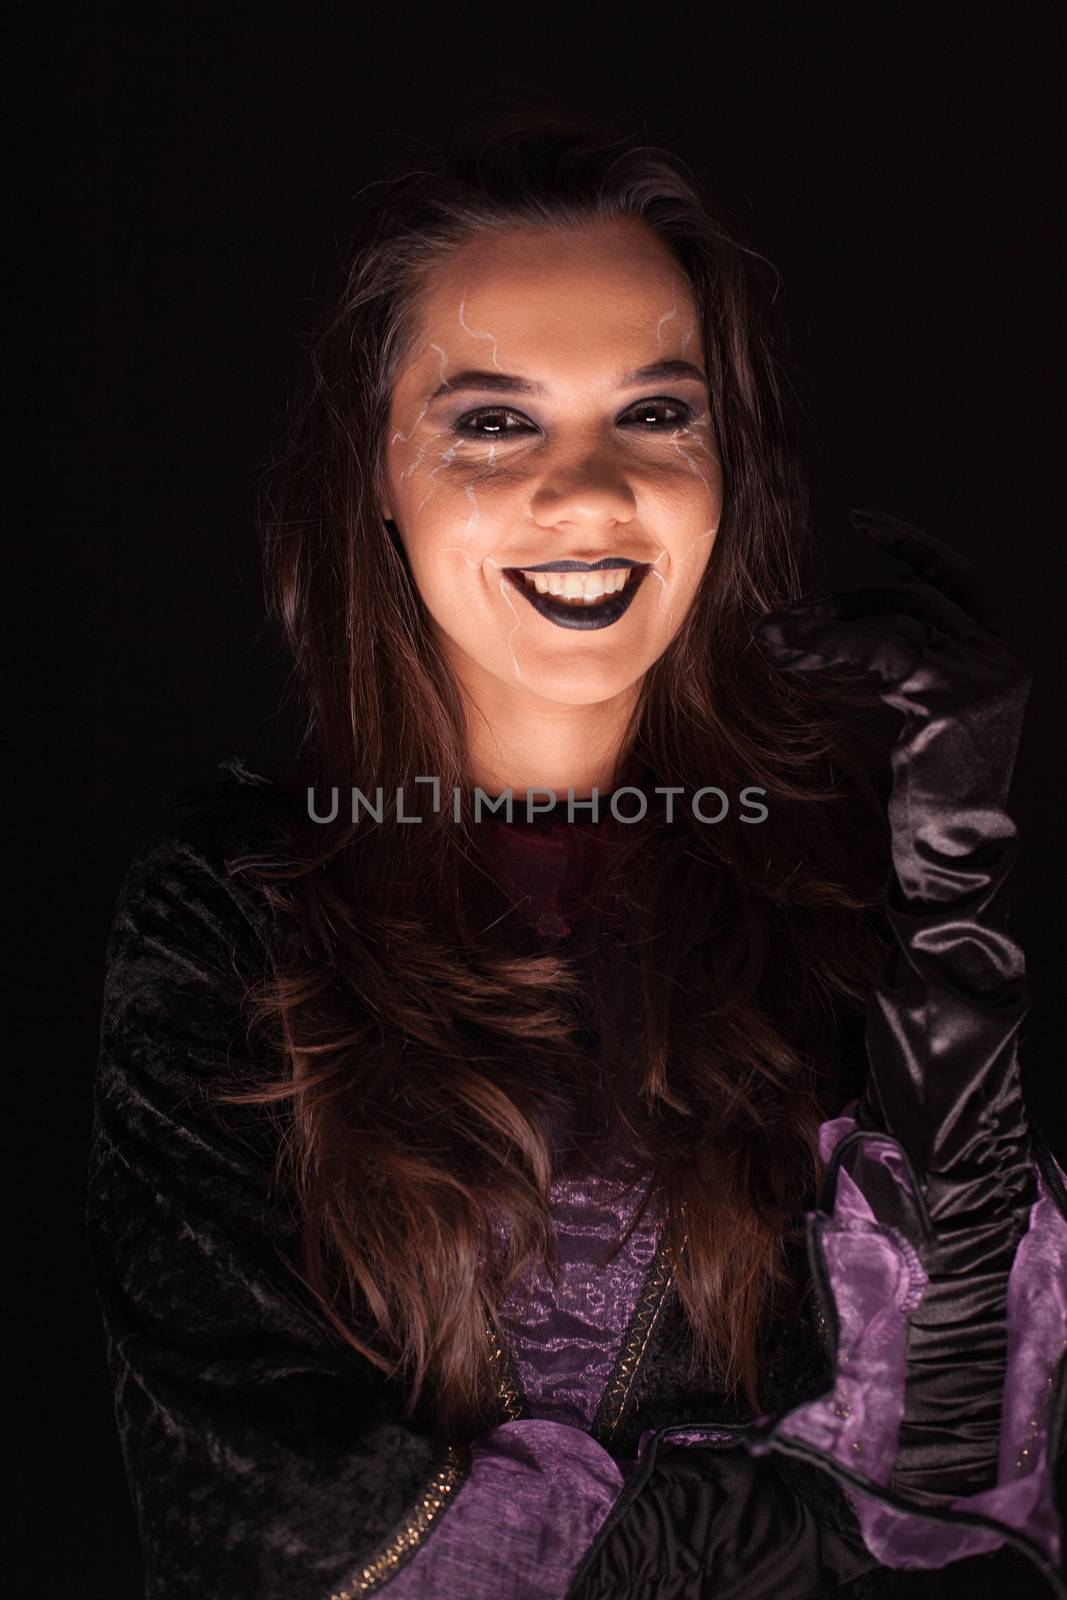 Young woman with a witch outfit for halloween over black background